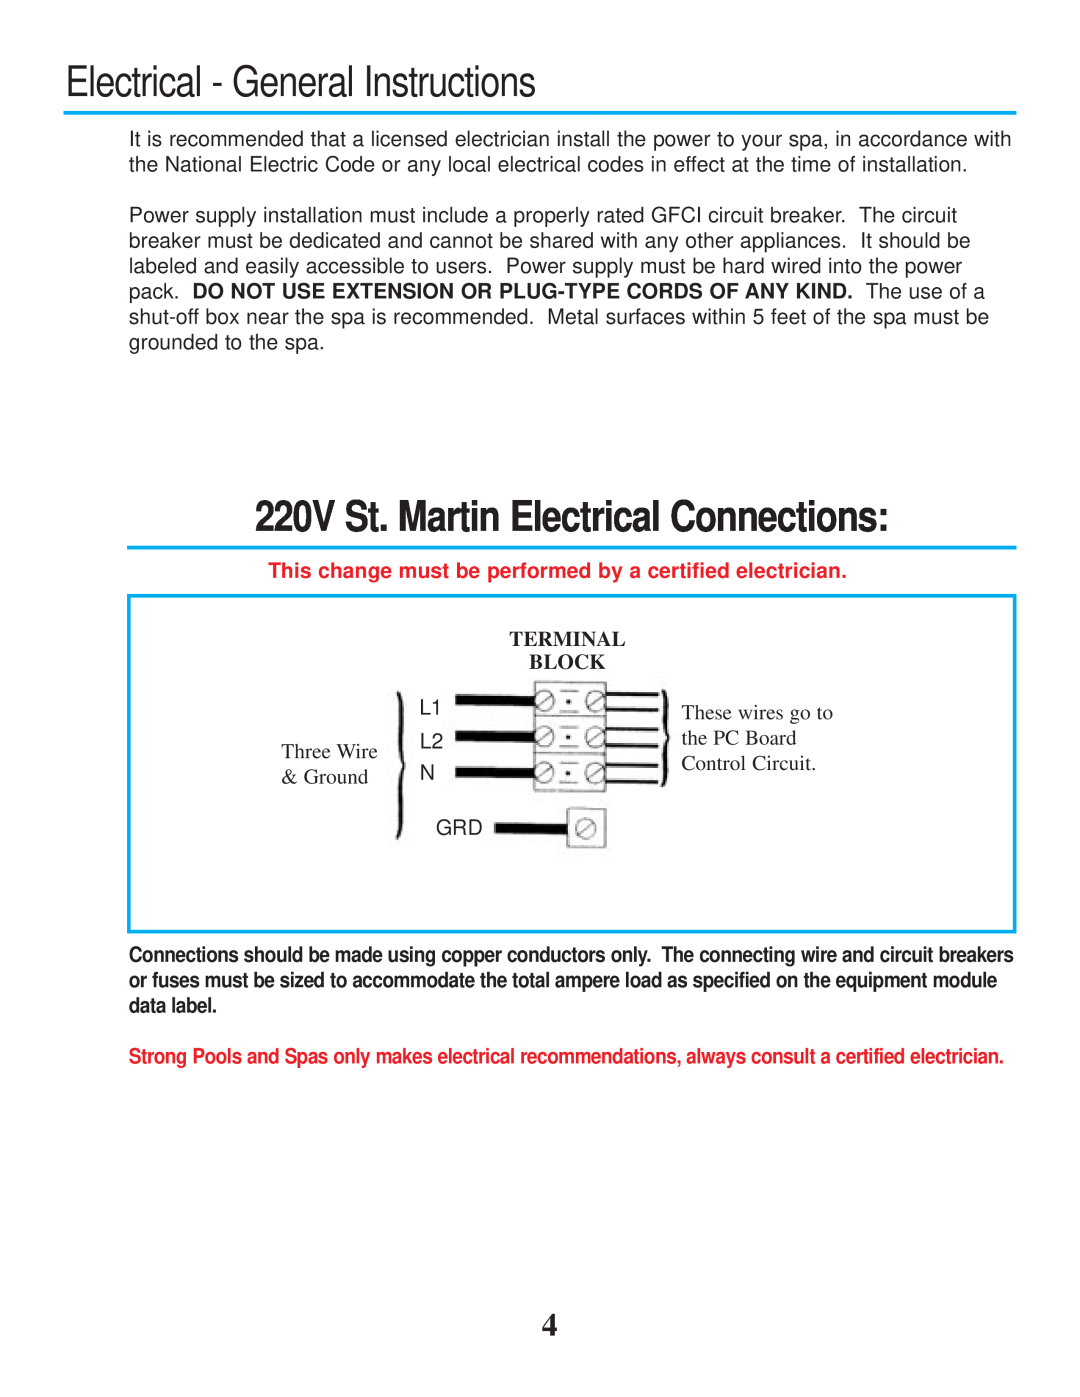 Strong Pools and Spas Electrical - General Instructions, 220V St. Martin Electrical Connections, Three Wire, Ground 